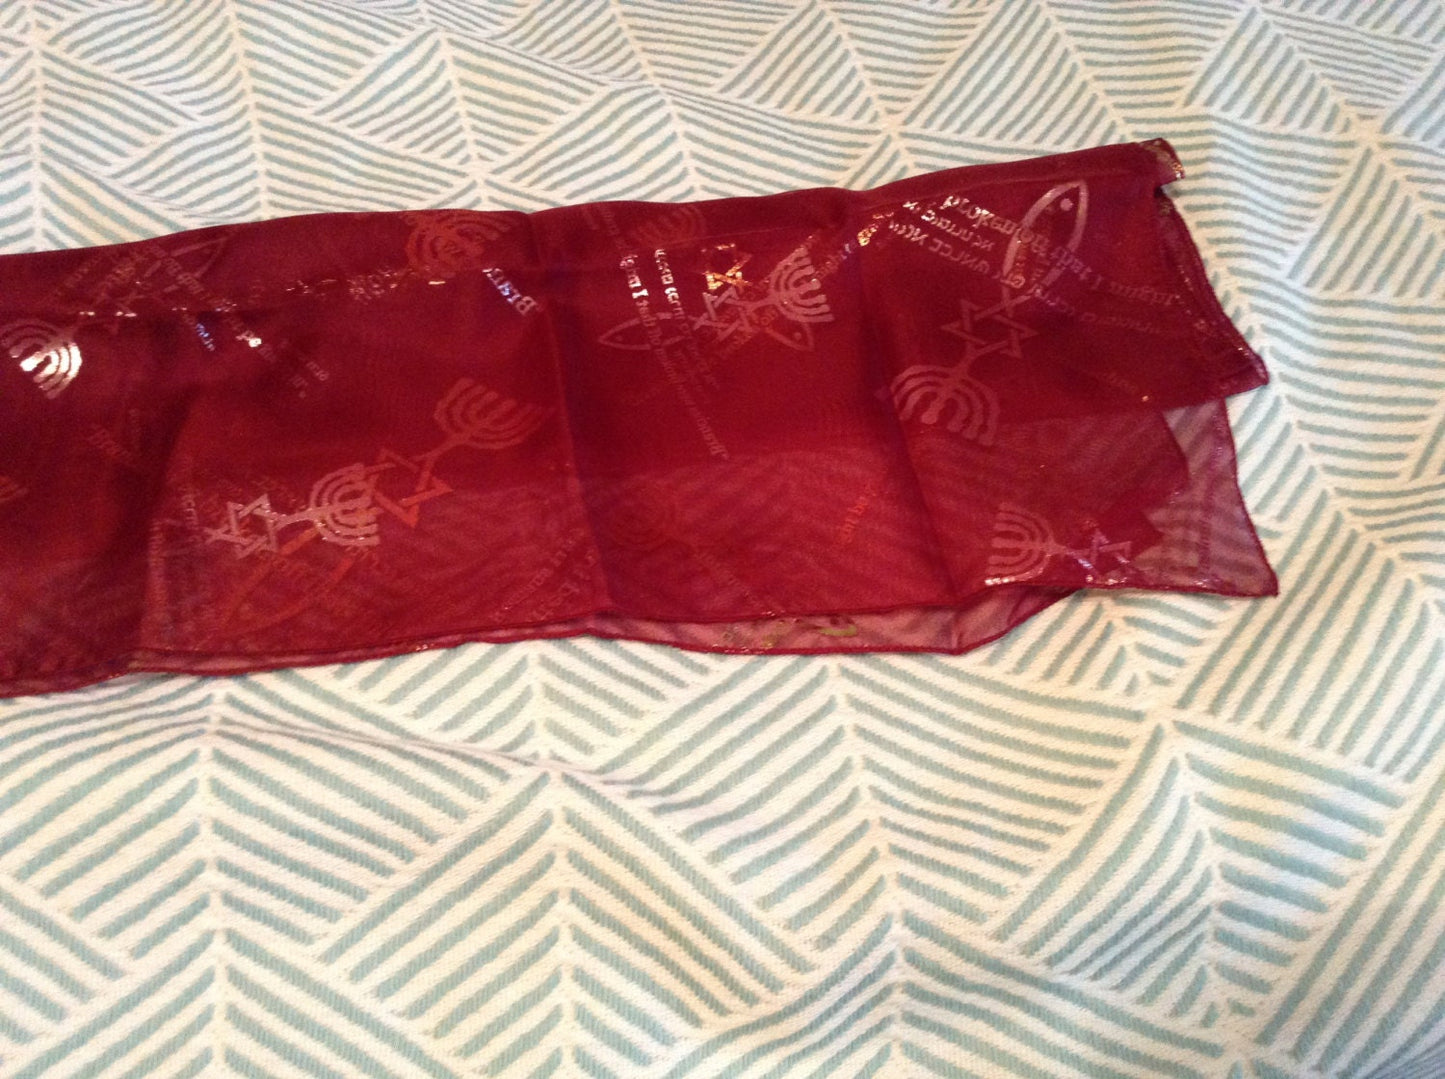 Head Covering or Scarf for ladies- GOLD on MAROON, Messianic Seal, (This Is An All Sales Final Item)